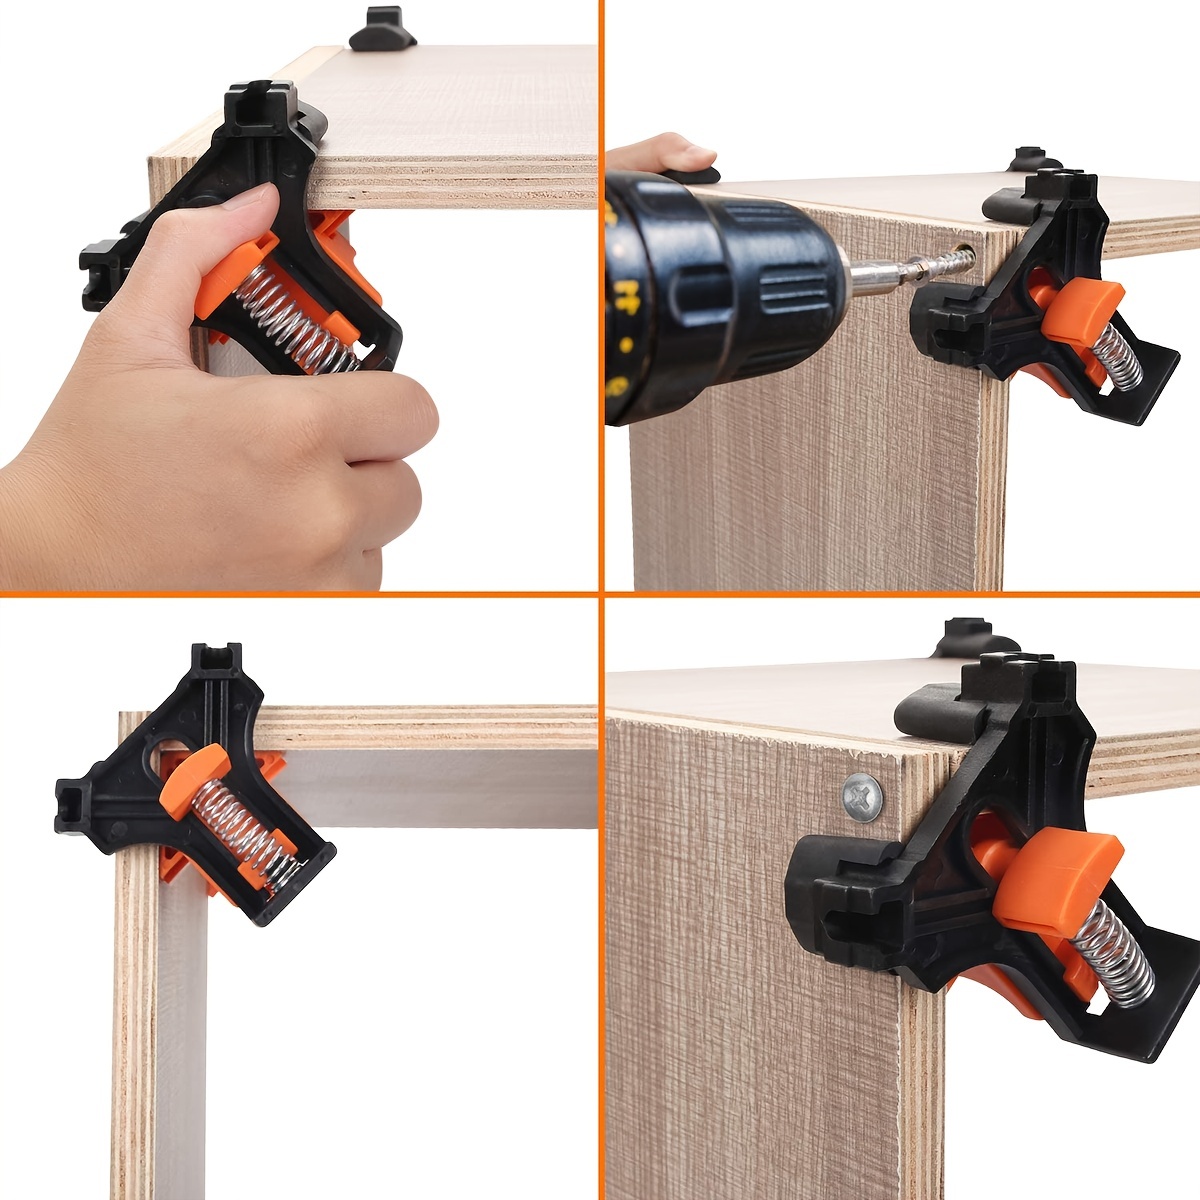  WETOLS Corner Clamp for woodworking, 90 Degree Right Angle Clamp,  Wood Clamps, 4Pcs Adjustable Spring Loaded Woodworking Clamp, Gifts for  Dad, Birthday Gifts for Men, Photo Framing-Orange : Everything Else